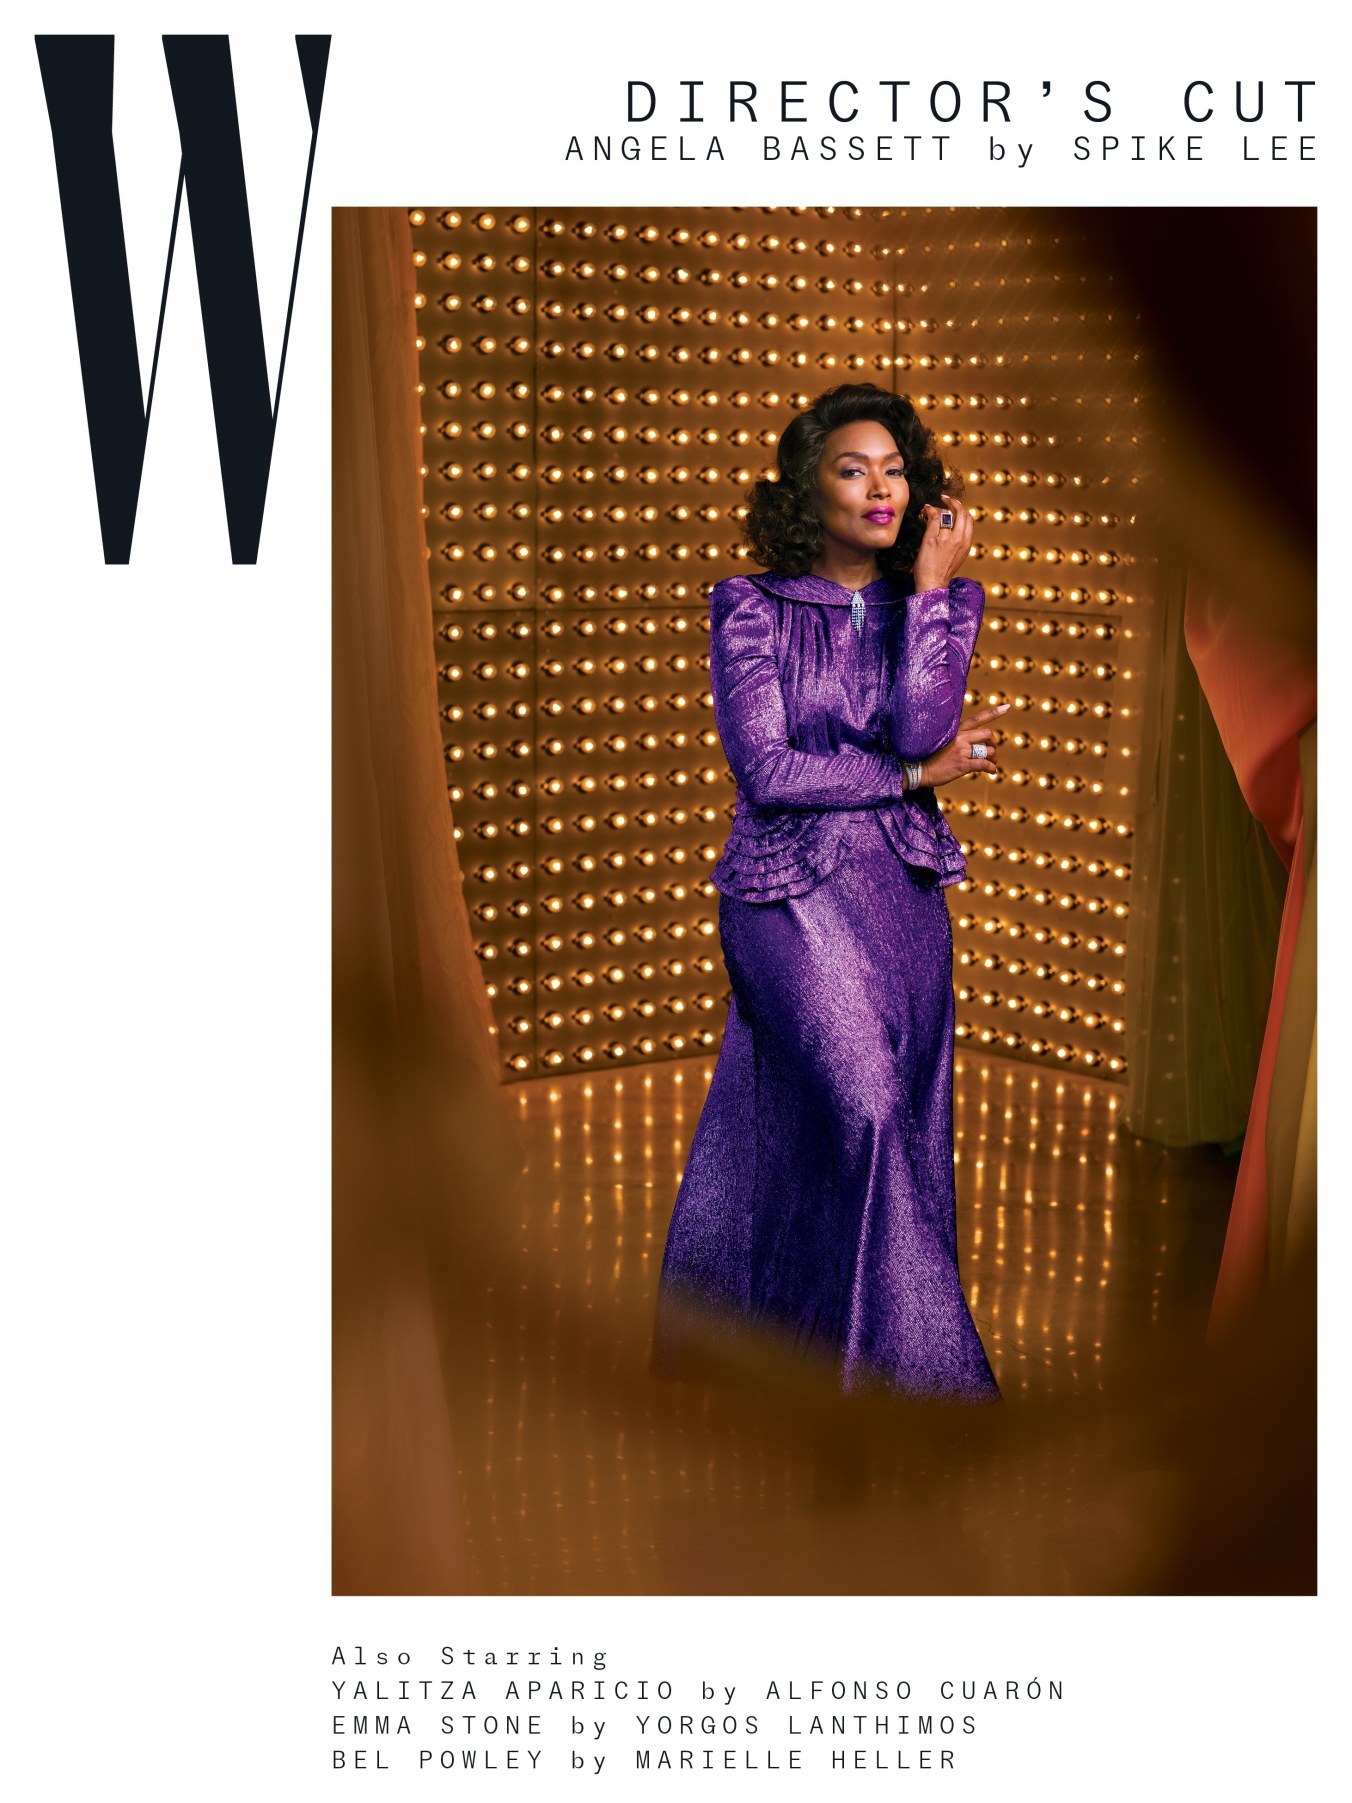 W magazine, March 2019, “Director’s Cut” - Fonts In Use